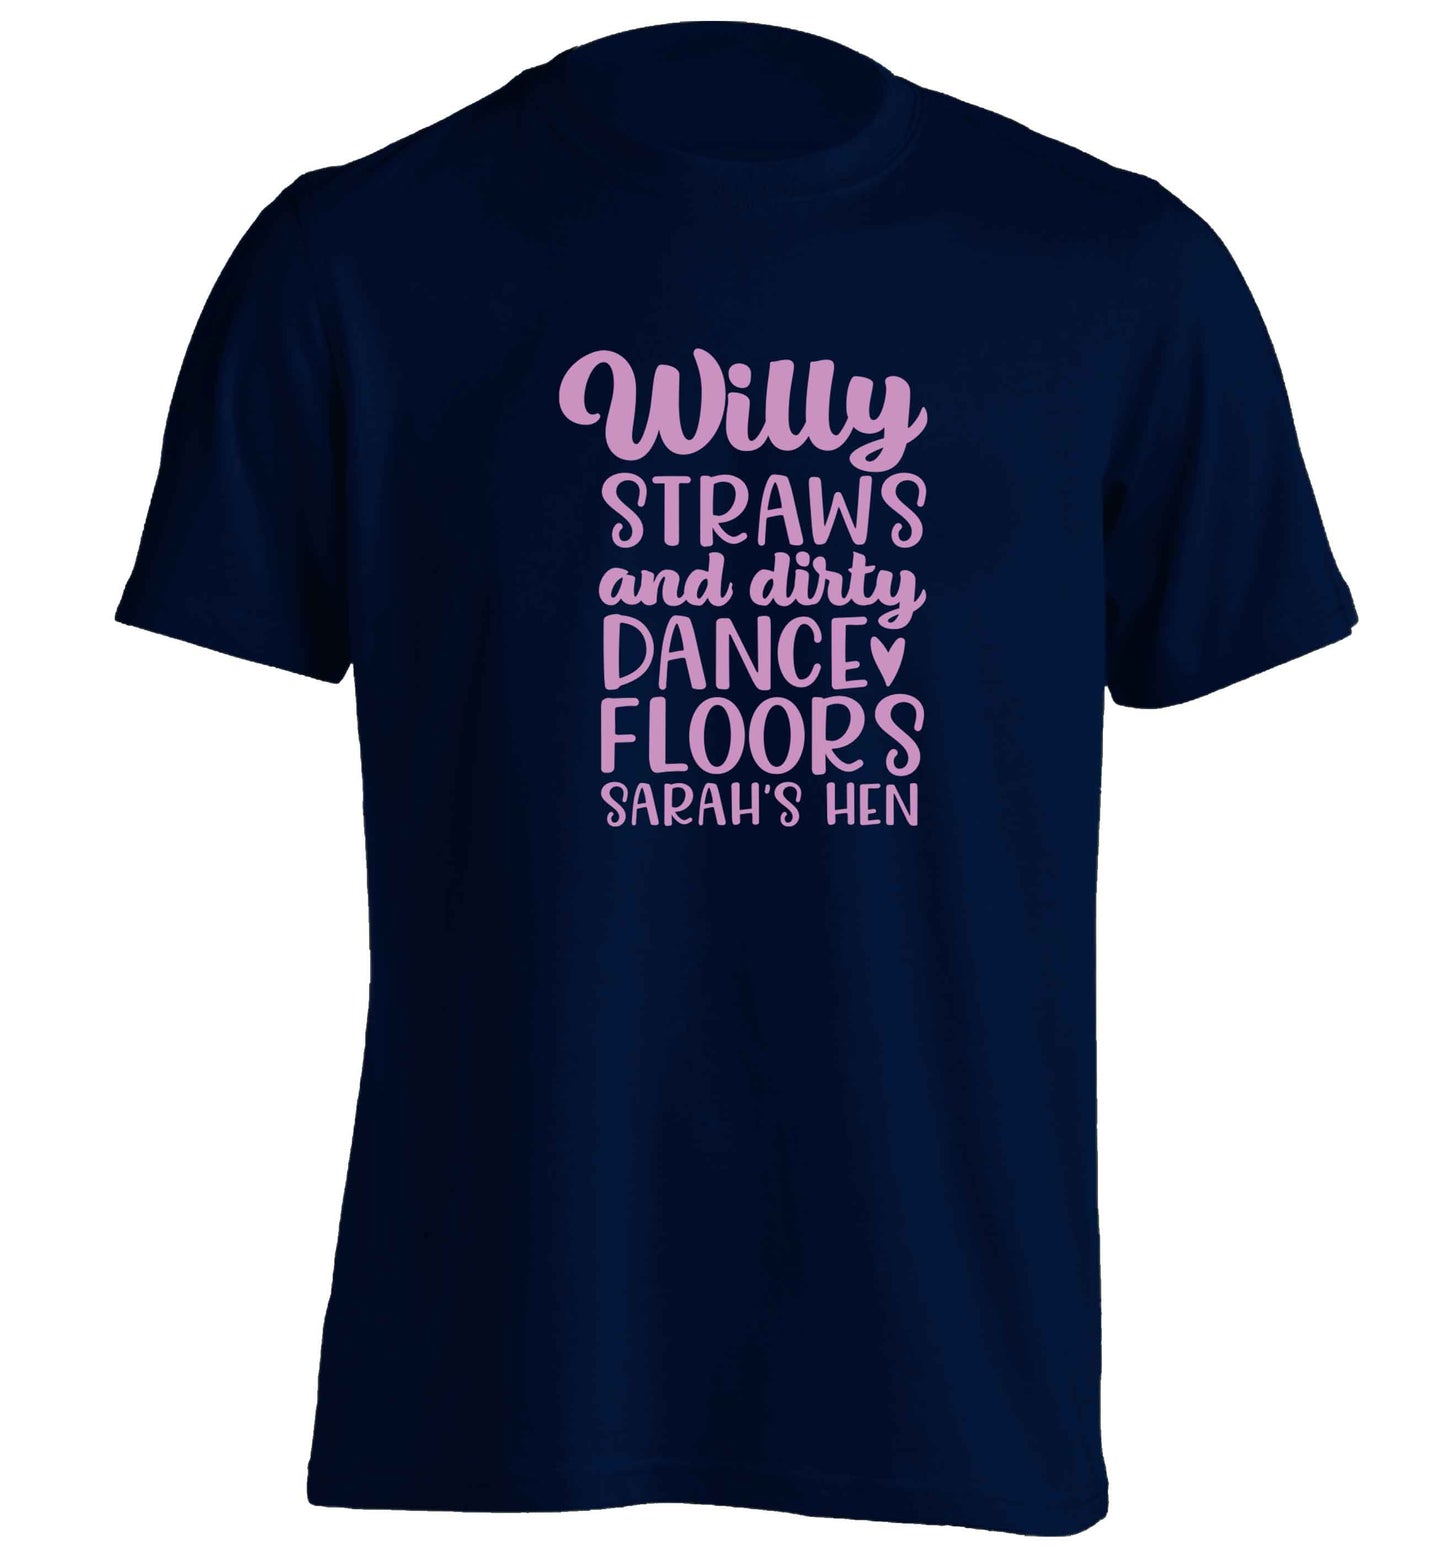 Willy straws and dirty dance floors adults unisex navy Tshirt 2XL